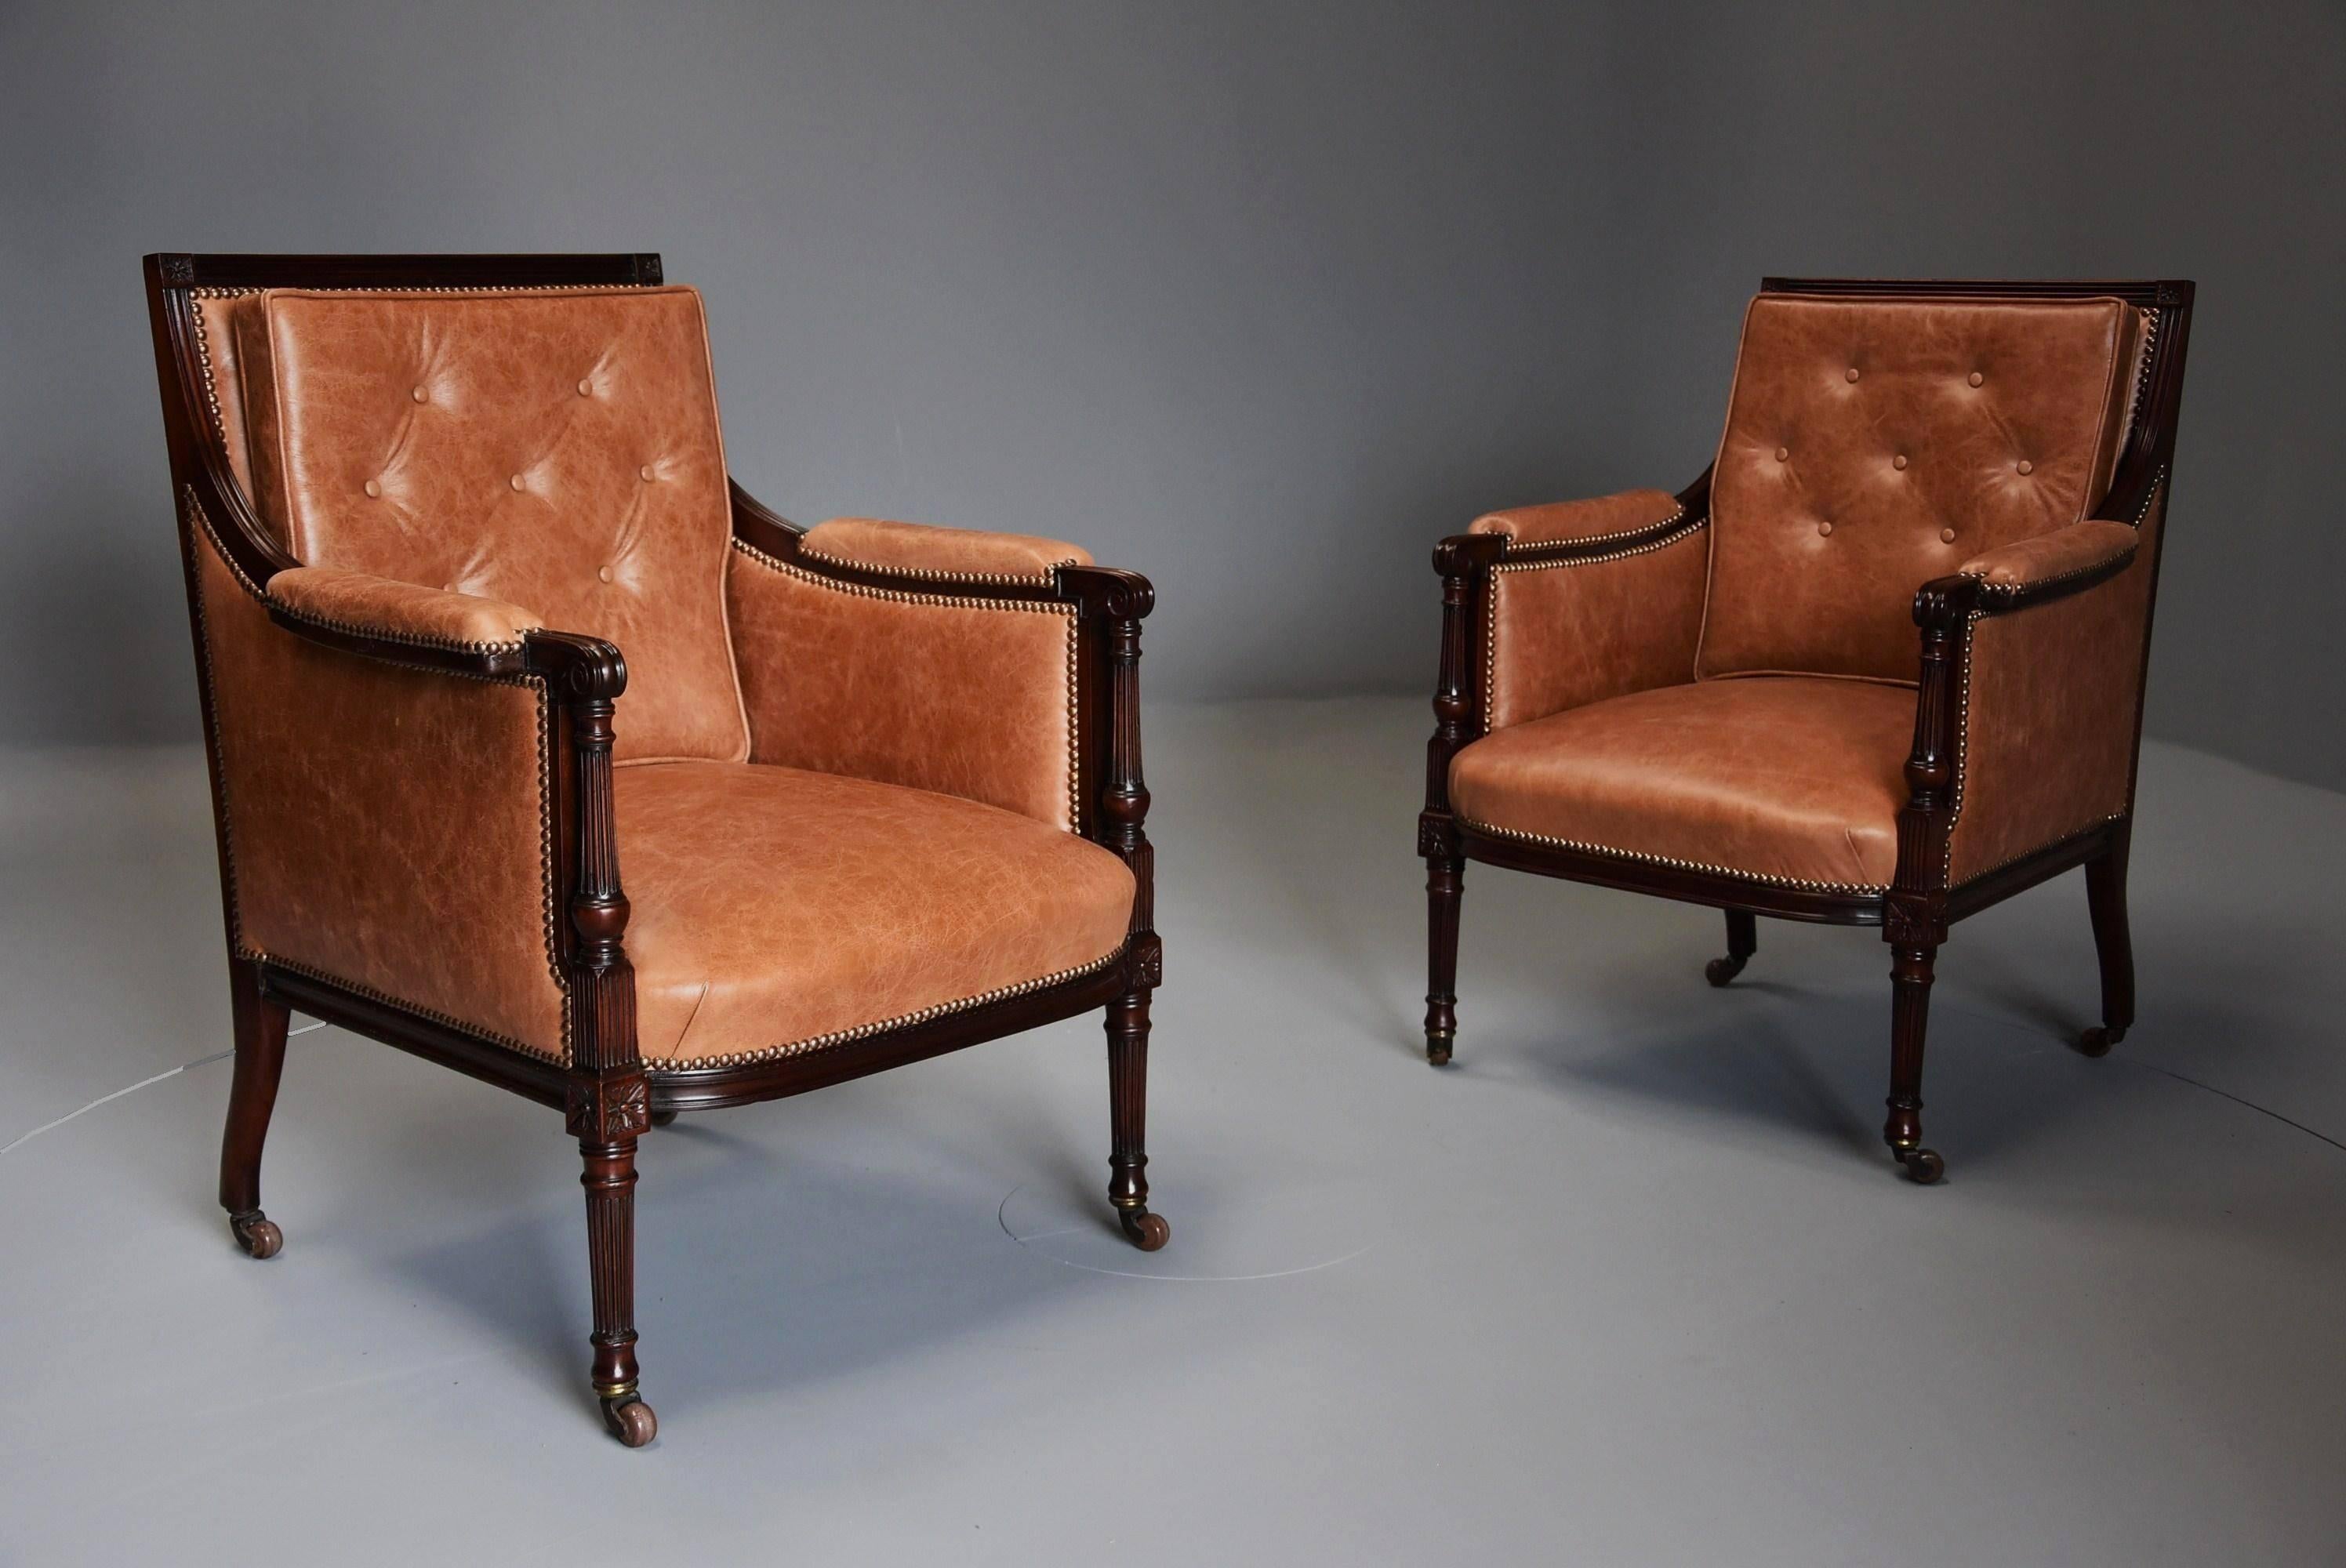 A superb pair of late 19th century ‘His & Hers’ mahogany bergere library chairs in the Sheraton style upholstered in a tan leather retaining retailers plaque 'Morgan & Co, The Hayes, Cardiff'.

These chairs consist of a square moulded top rail